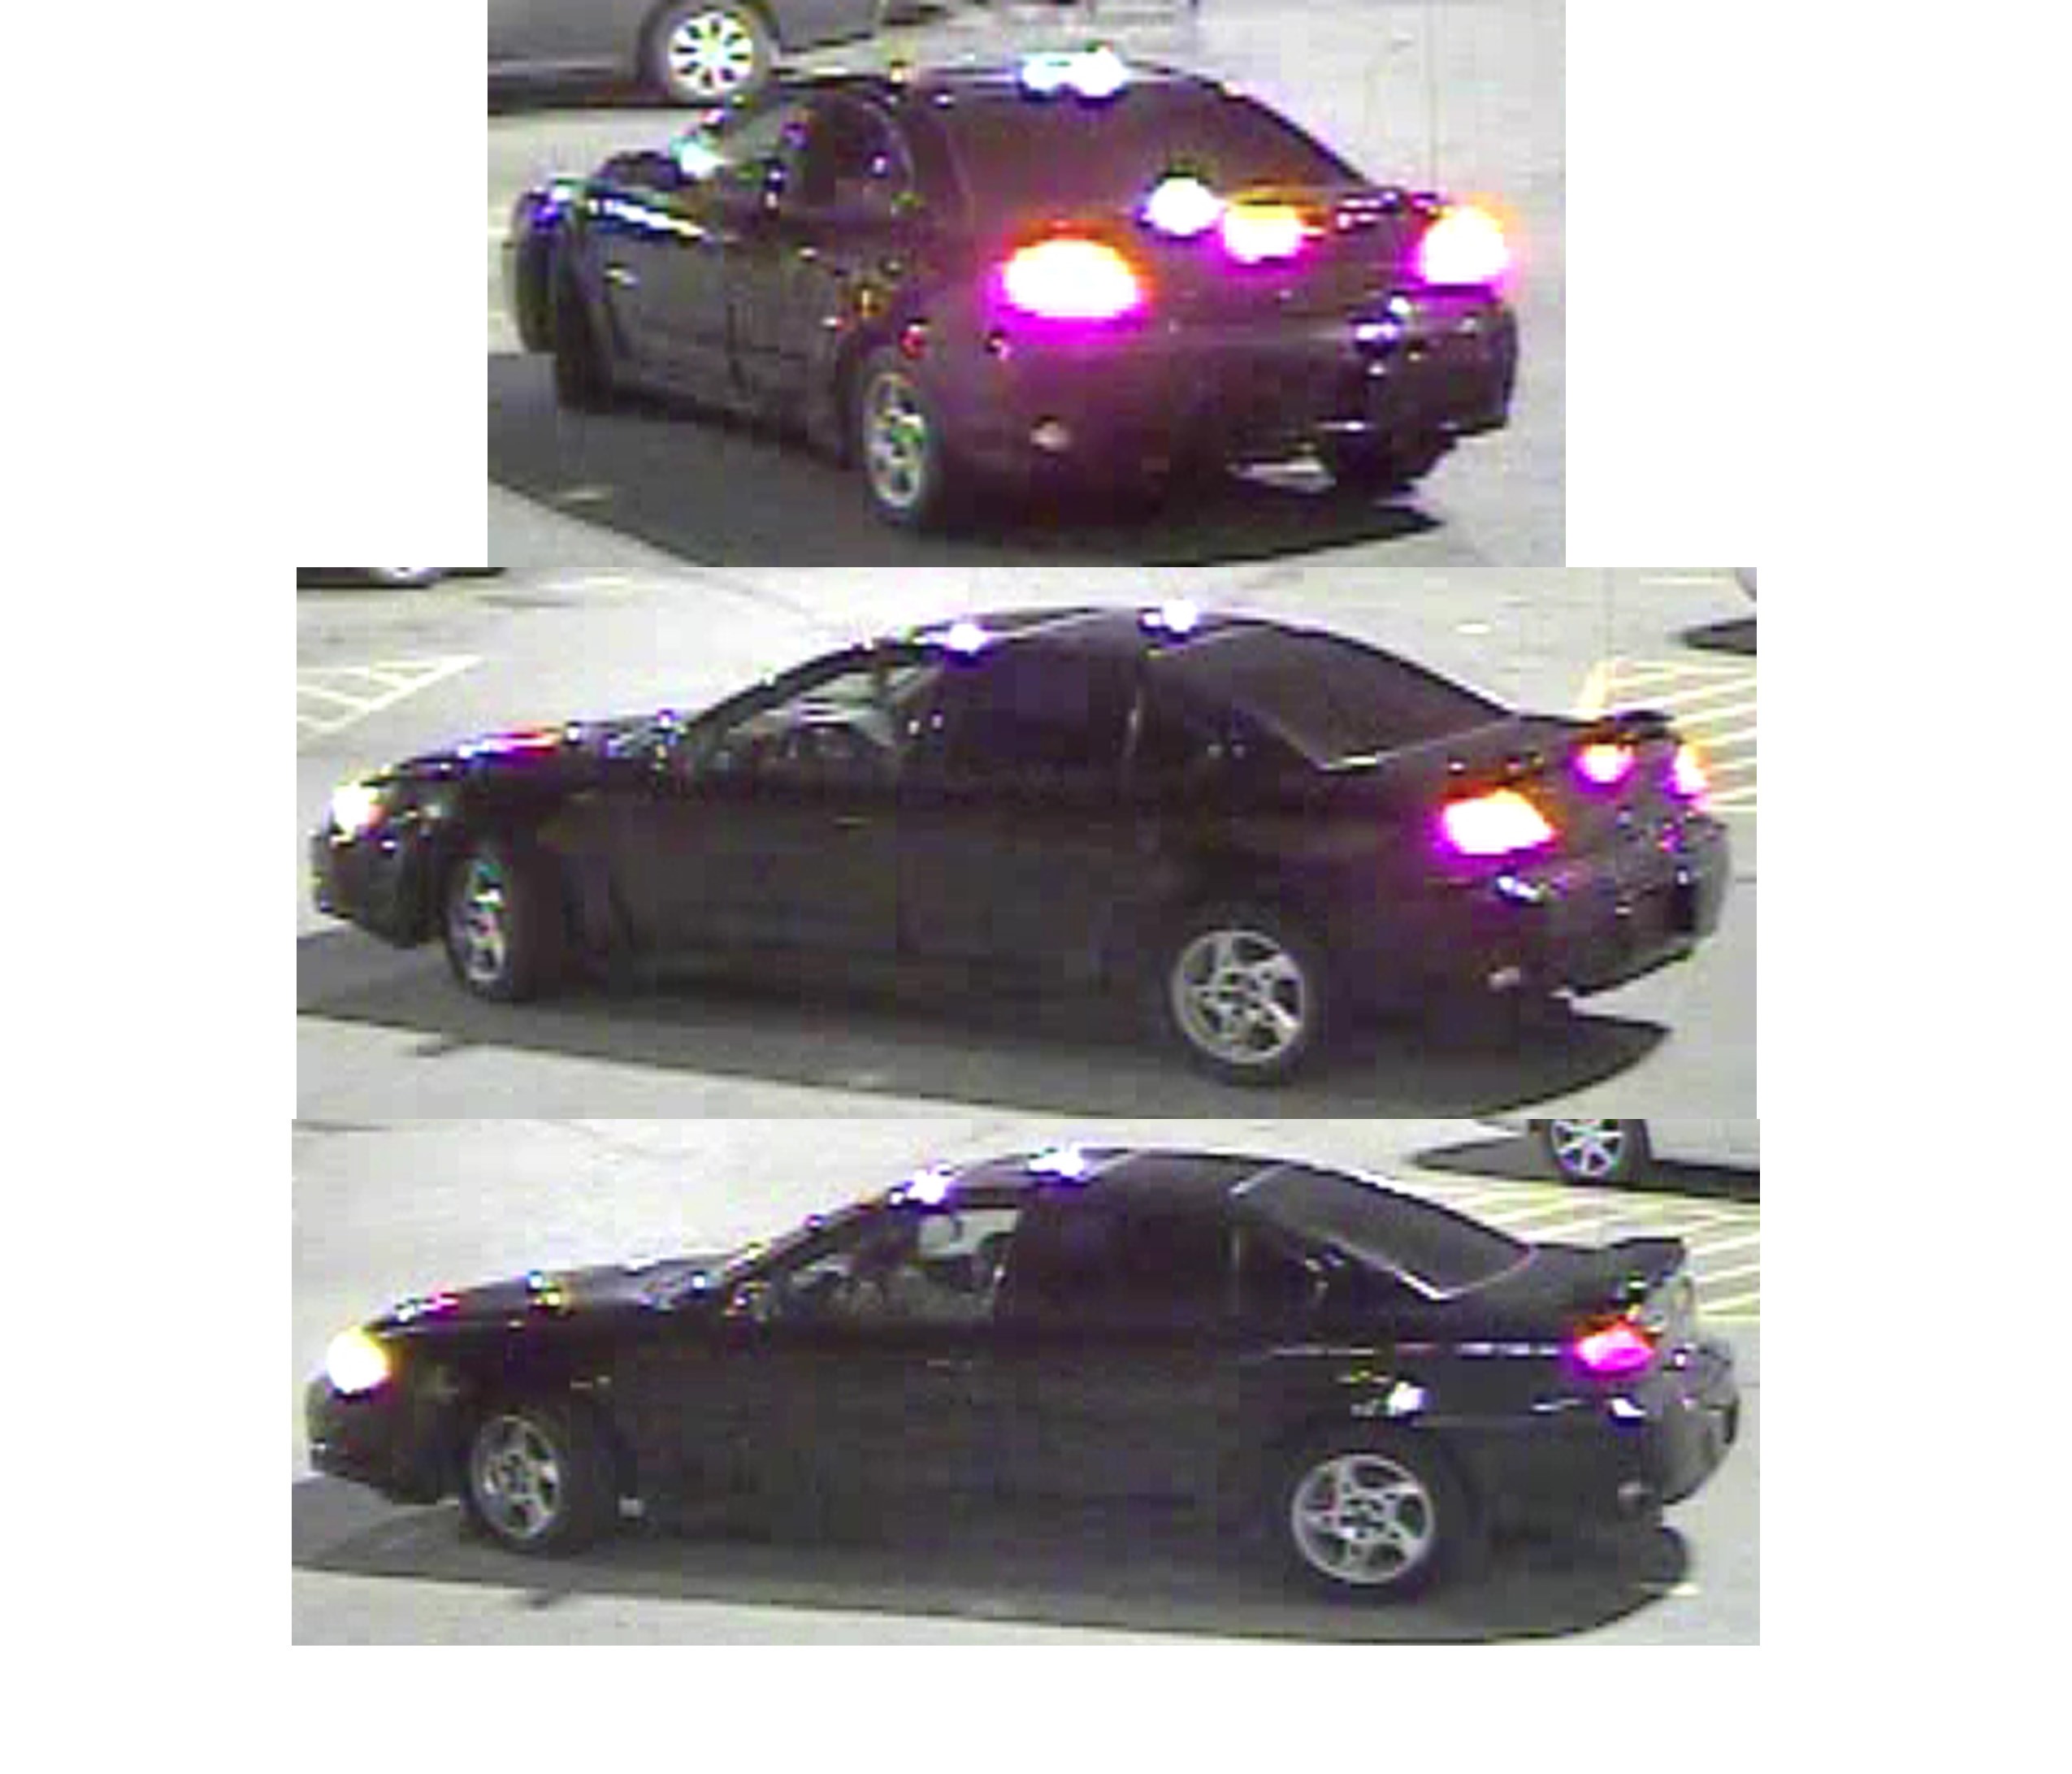 unknown suspect(s) were last seen in a black Pontiac Grand Am with no license plates